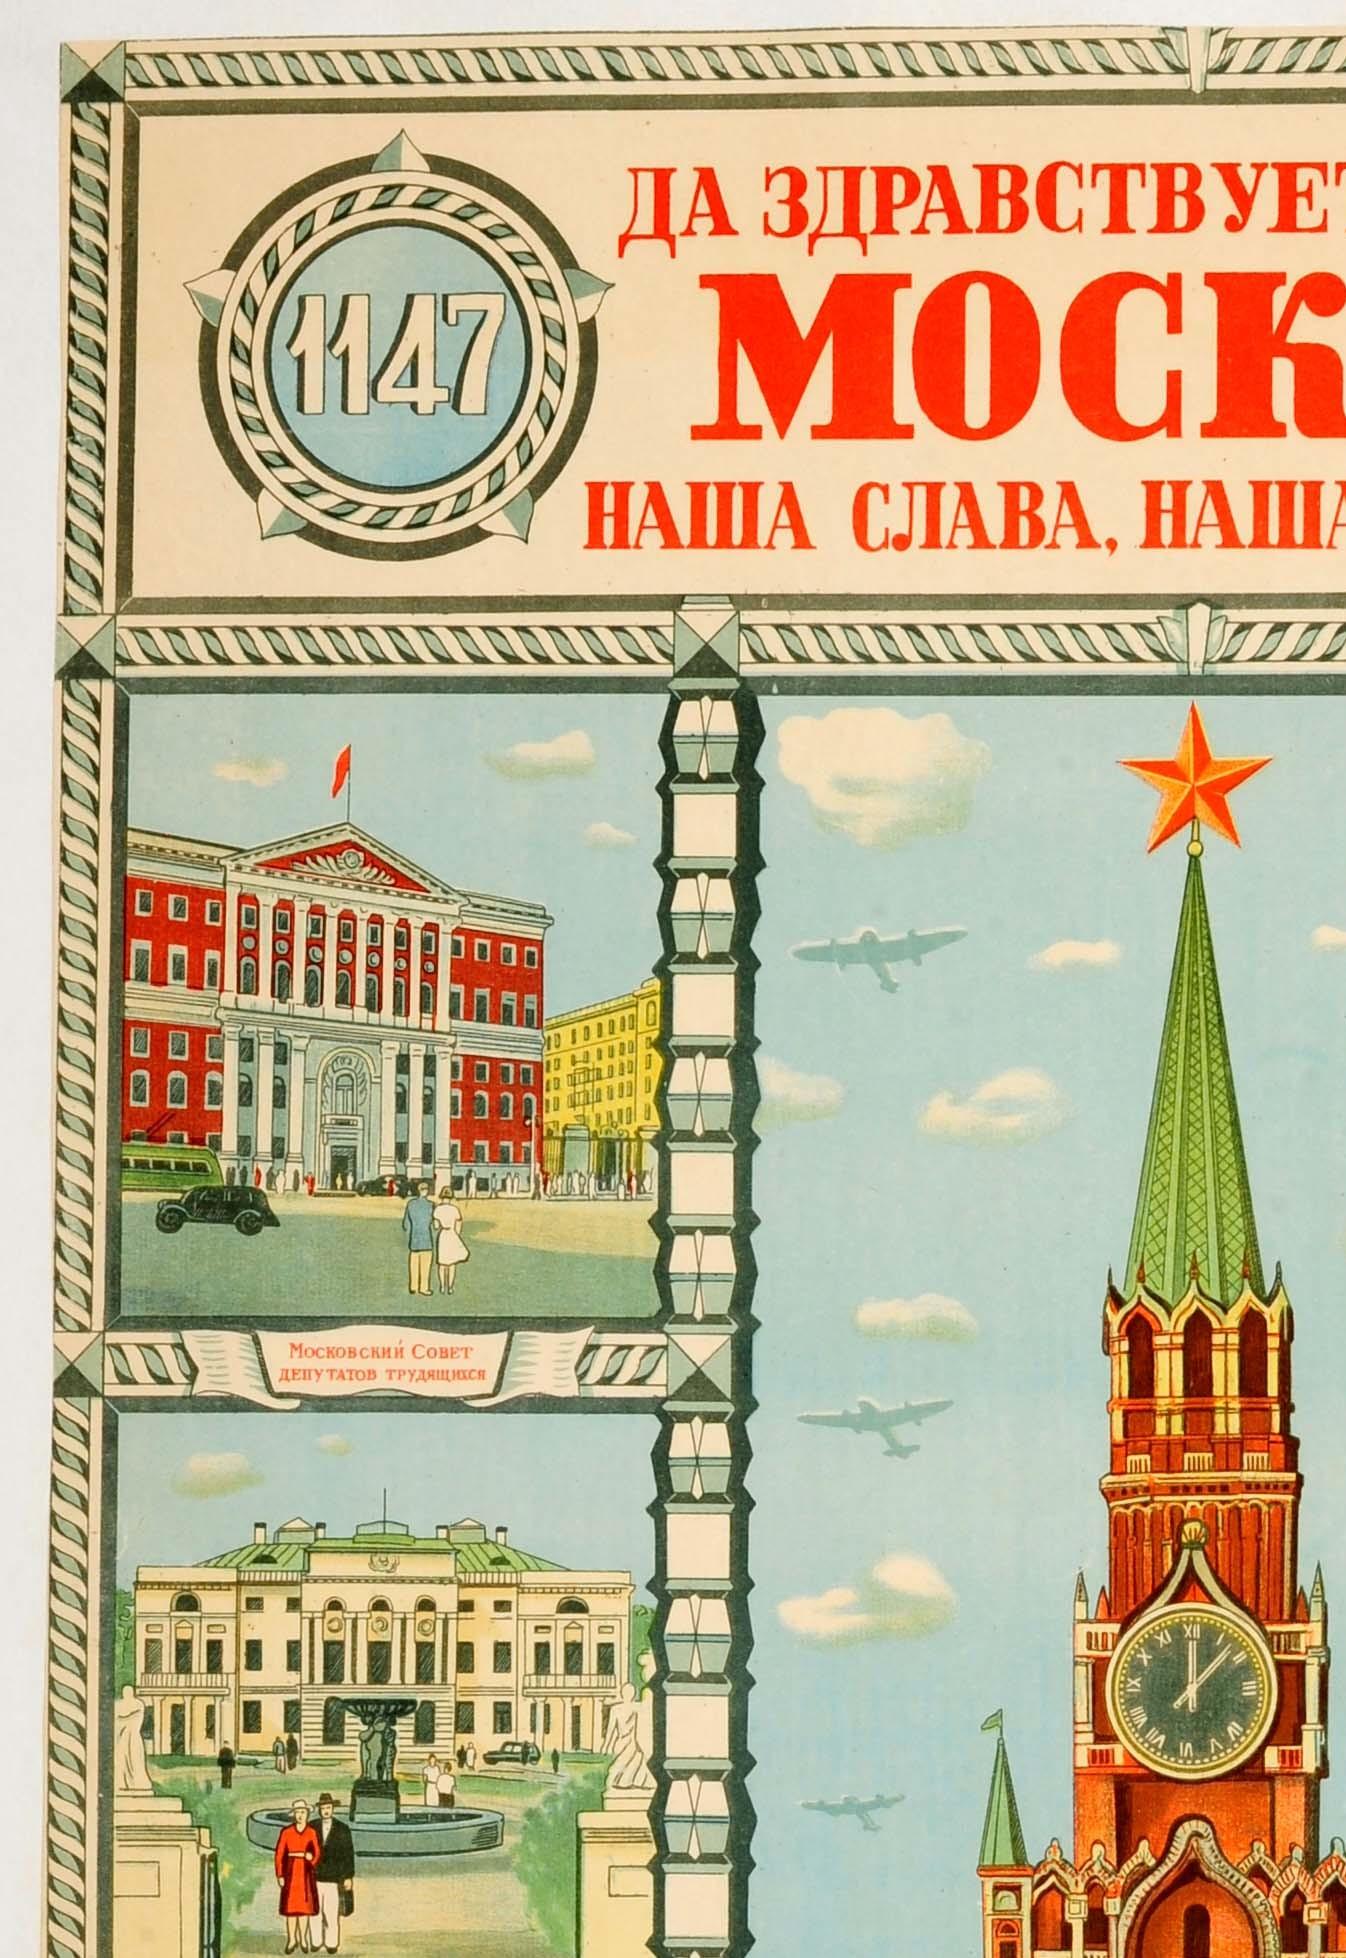 Original vintage Soviet propaganda poster celebrating the 800th anniversary of Moscow 1147-1947: Long Live Our Moscow - Our Glory, Our Pride! Great design featuring colorful images of different points of interest in Moscow of historic buildings and